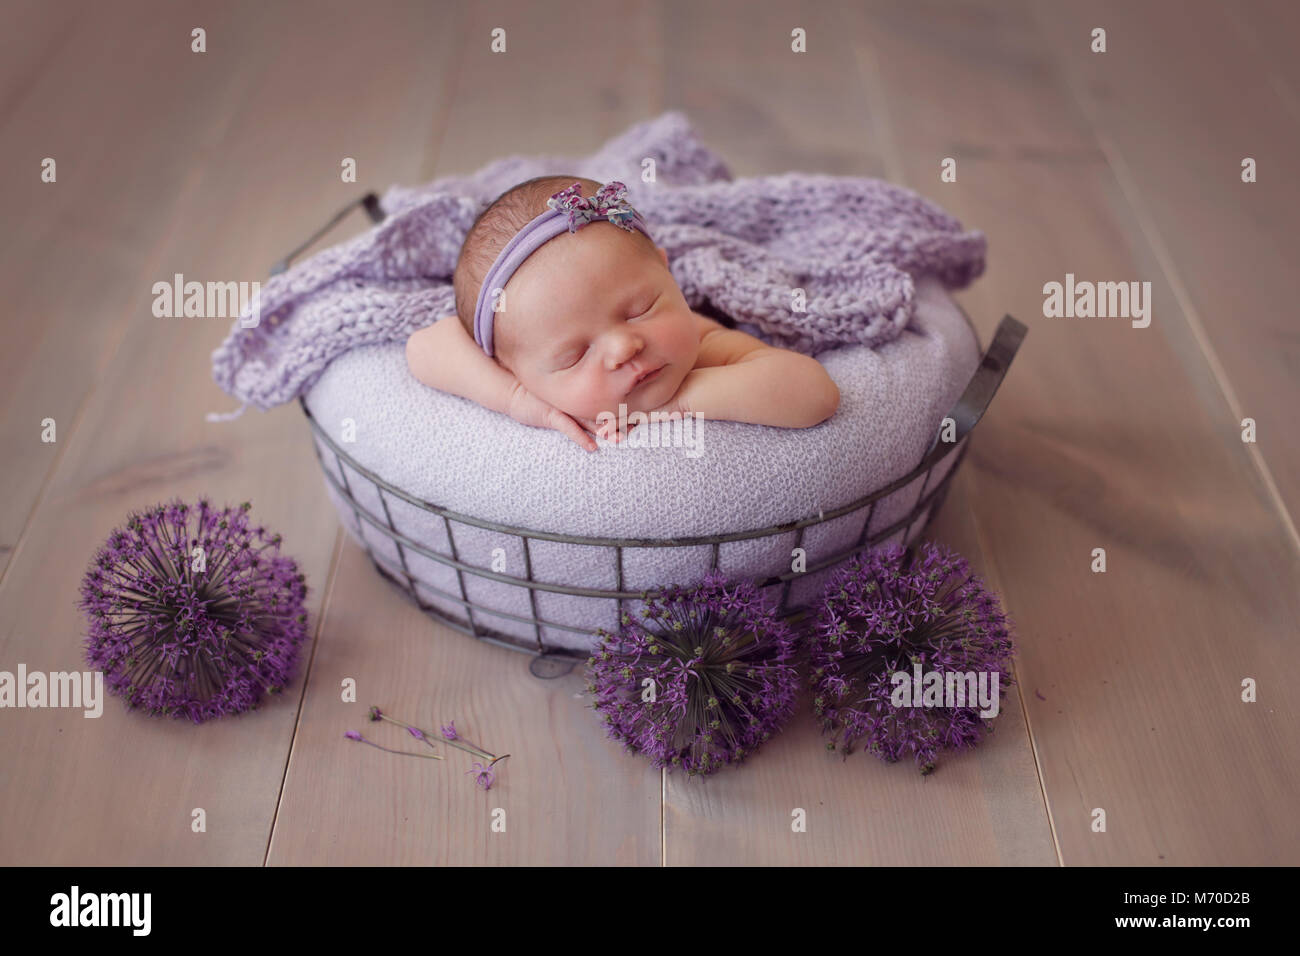 newborn baby sleeping in a basket, on a wooden background and purple onions Stock Photo